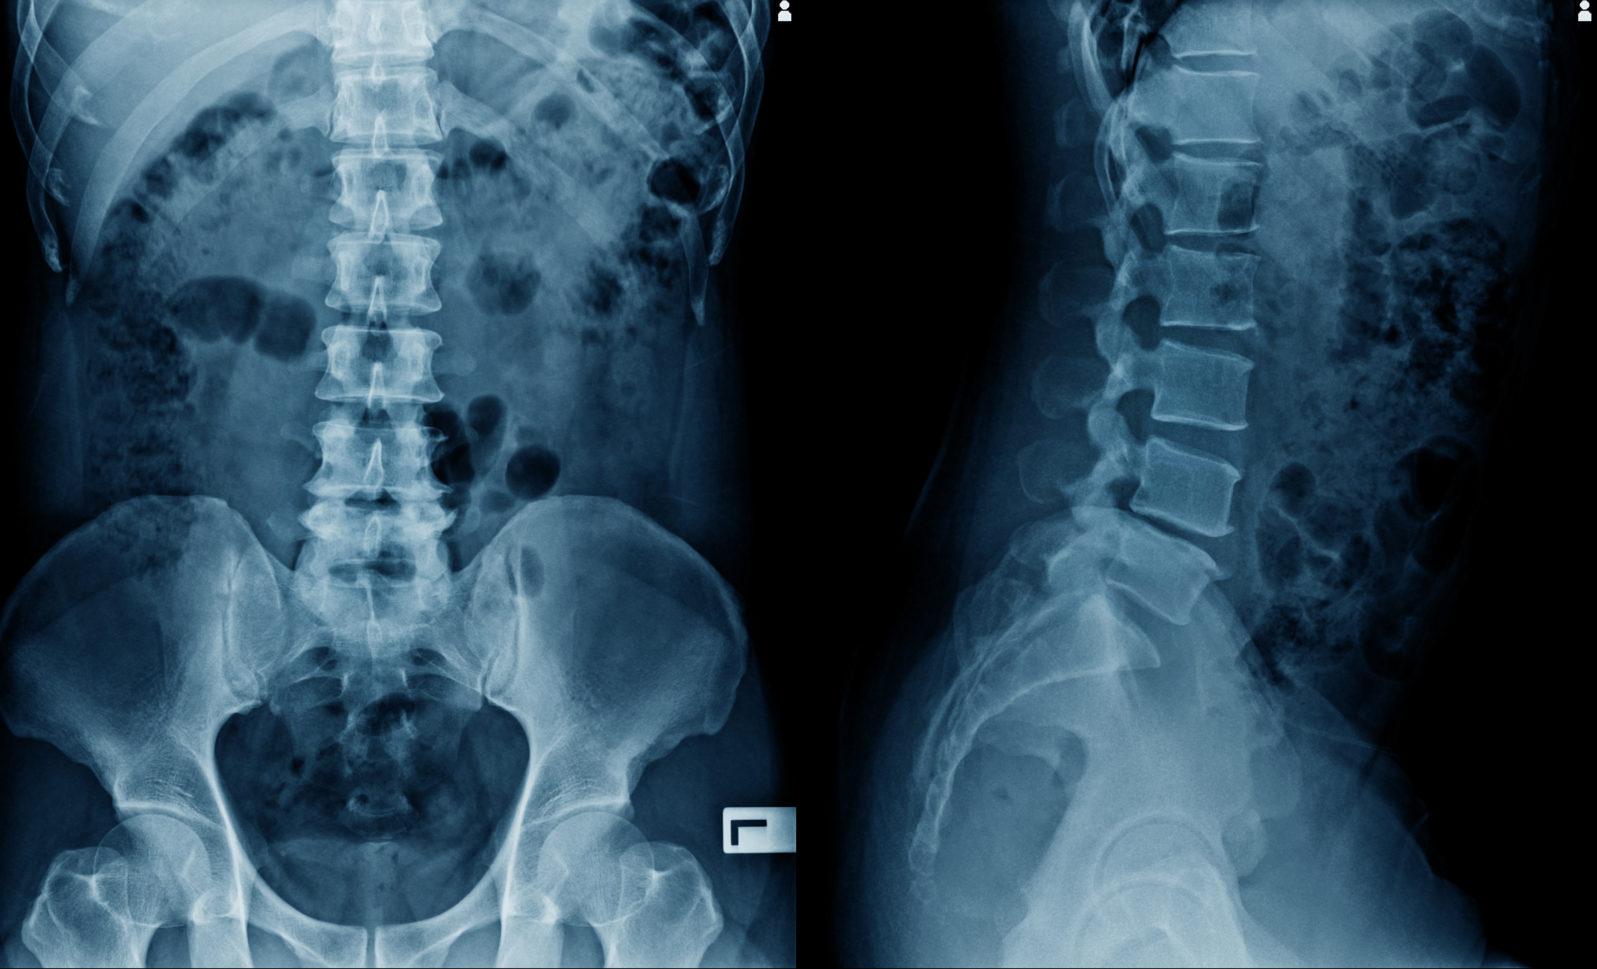 x-ray image of spine